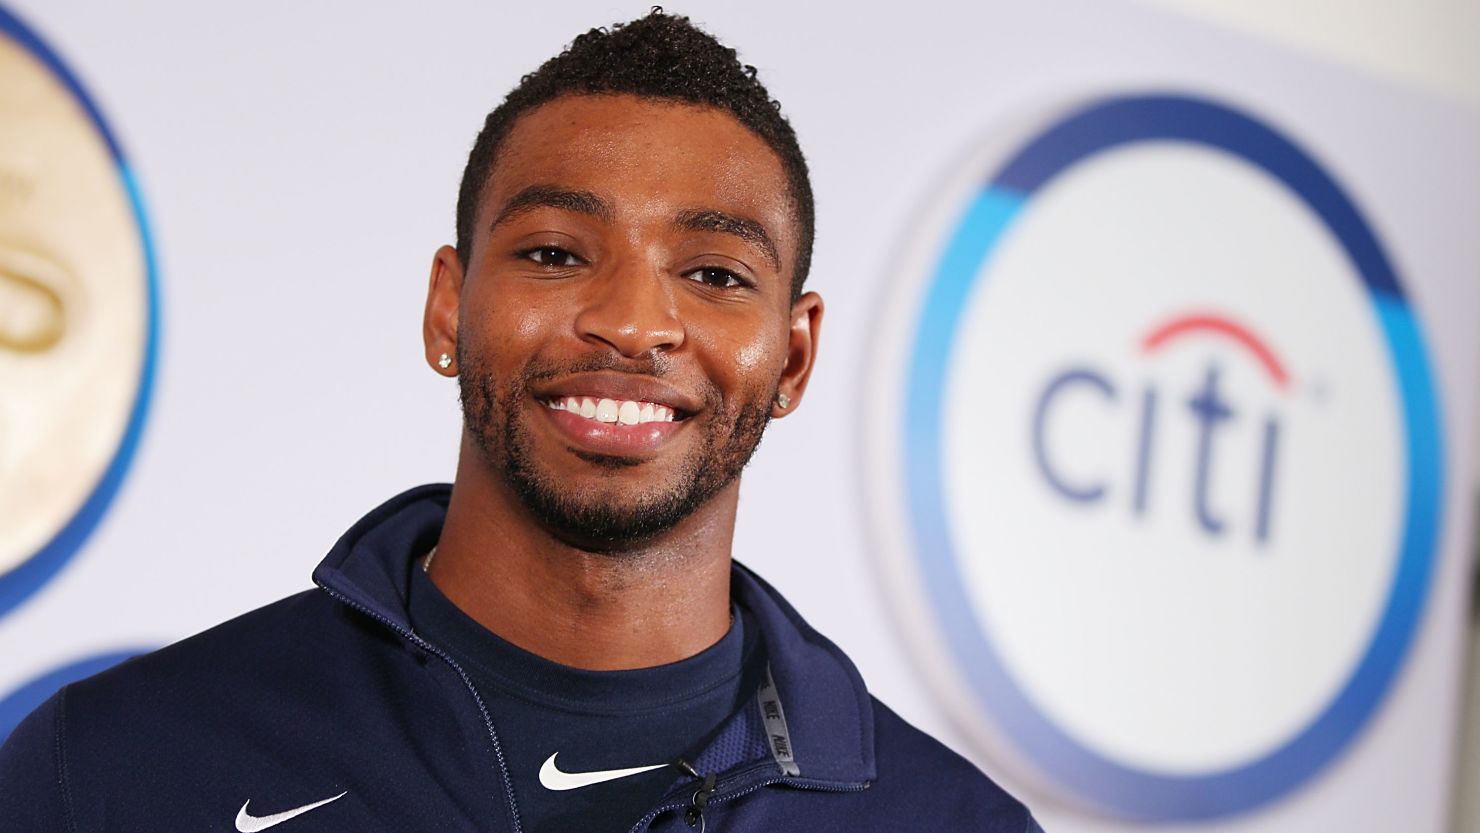 Olympic swimmer Cullen Jones got involved with the Make a Splash Initiative in 2008 after winning an Olympic Gold medal.